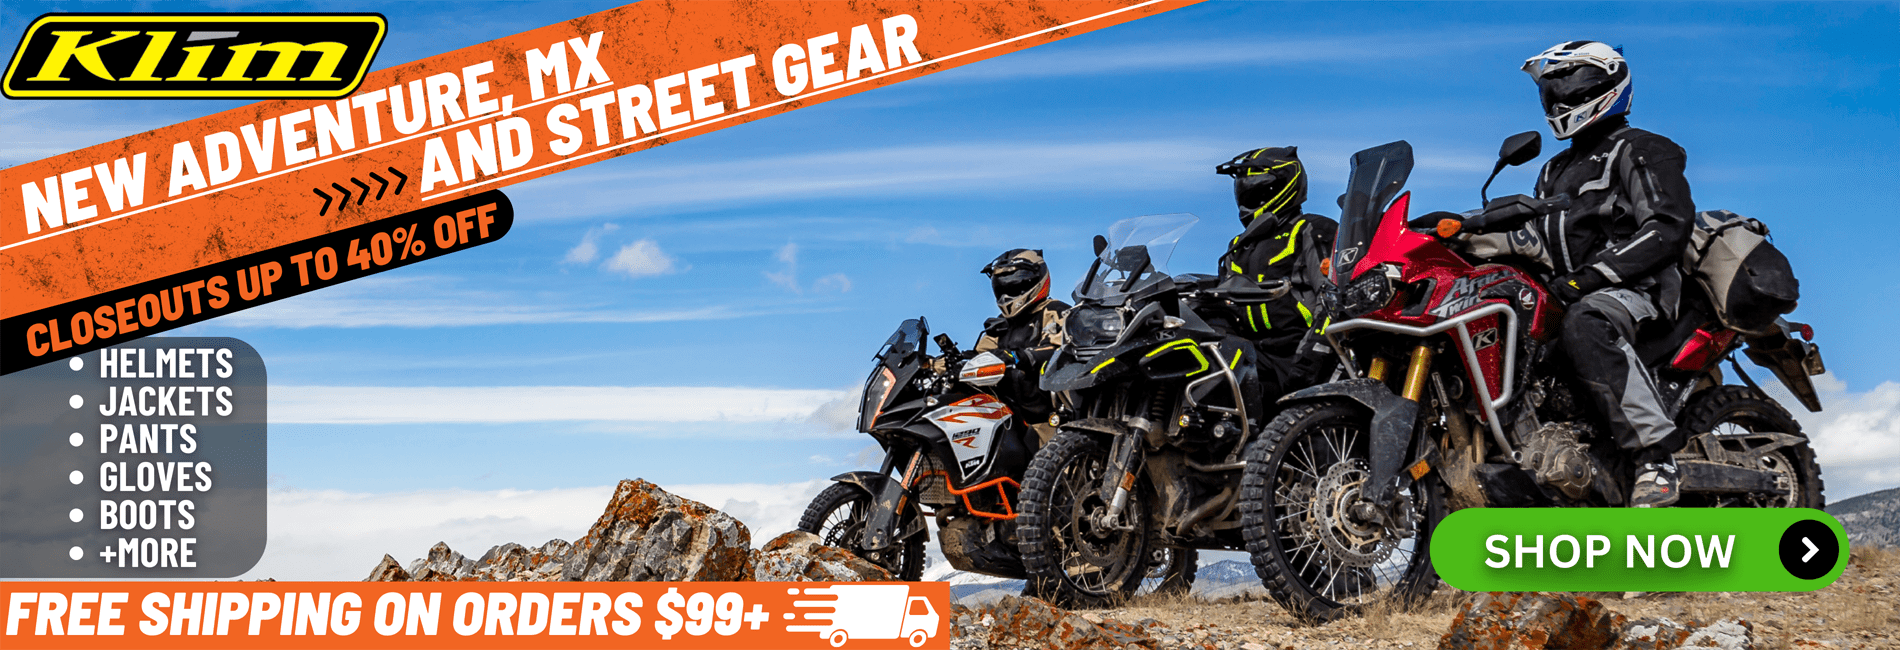 Check out the new Klim gear here